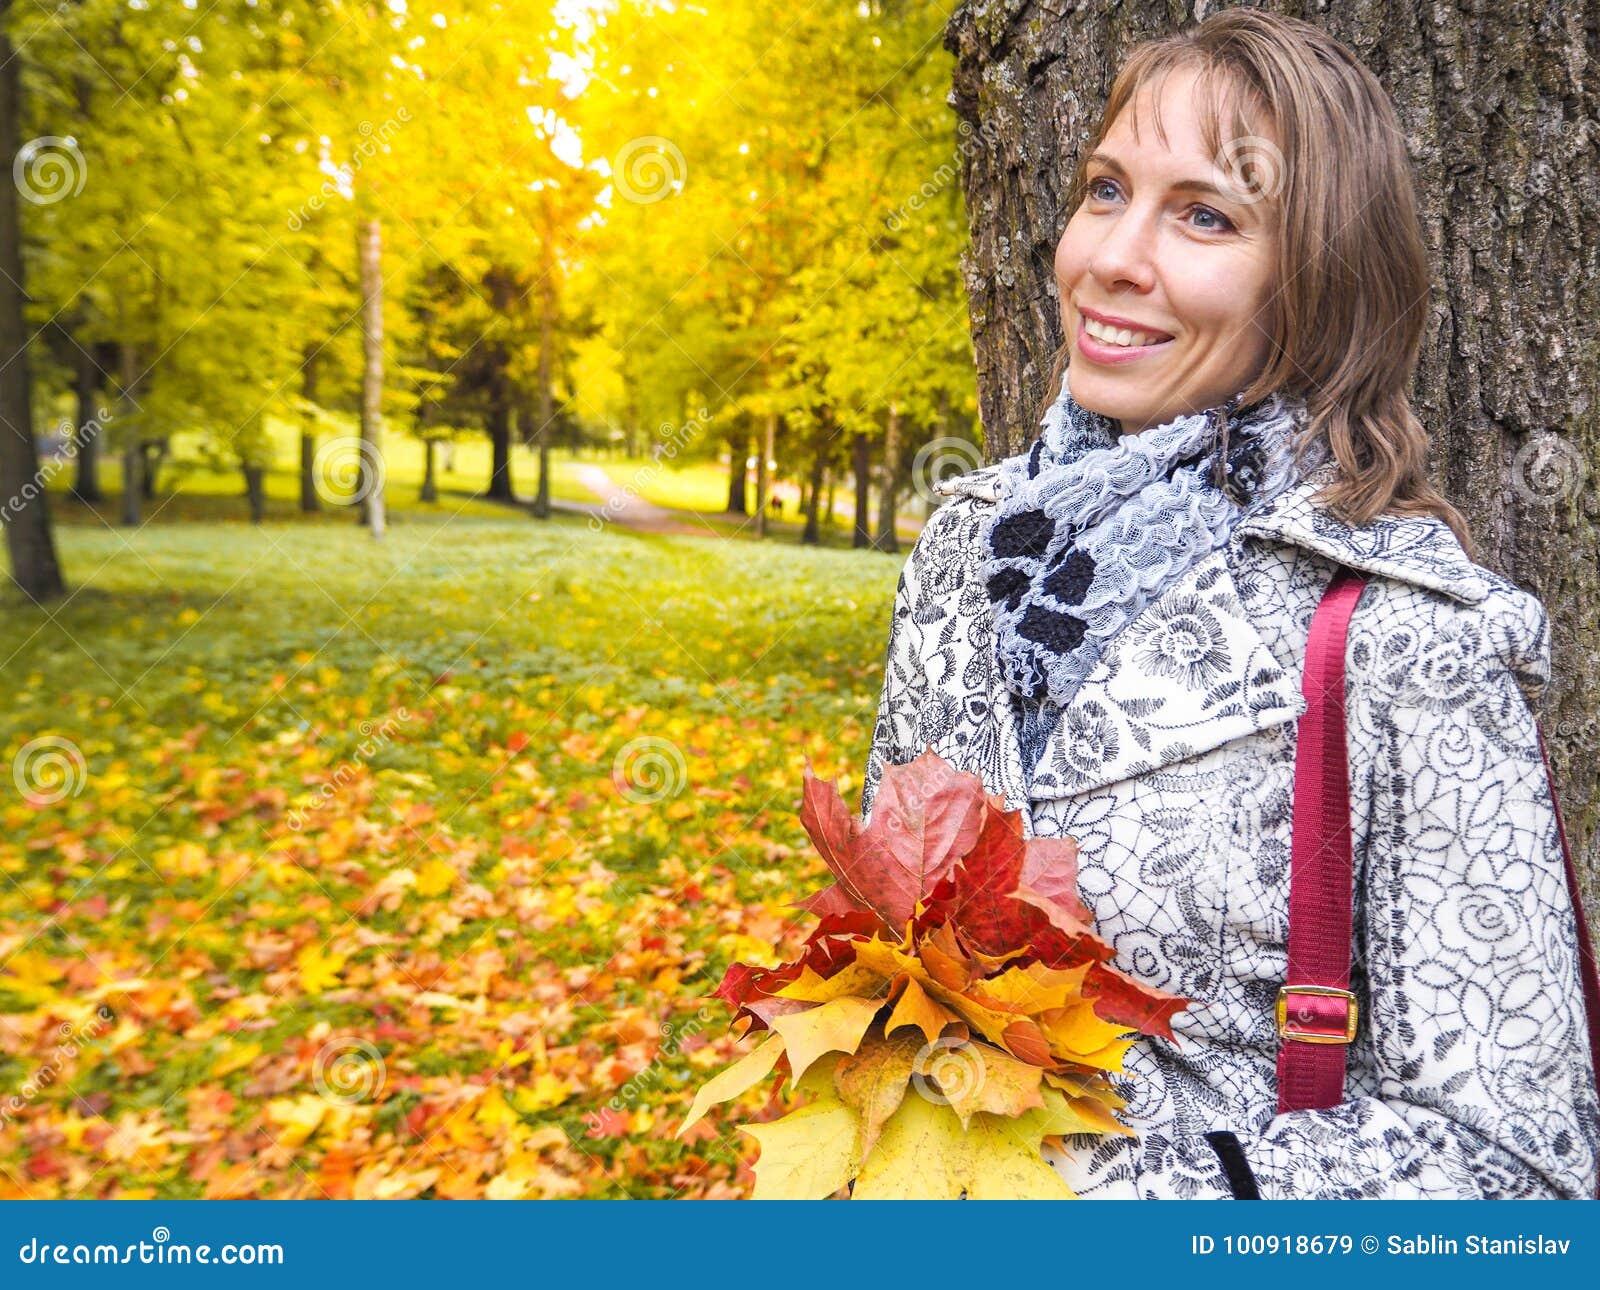 Beautiful Woman in Autumn Park. Woman in Autumn Park with Colorful ...